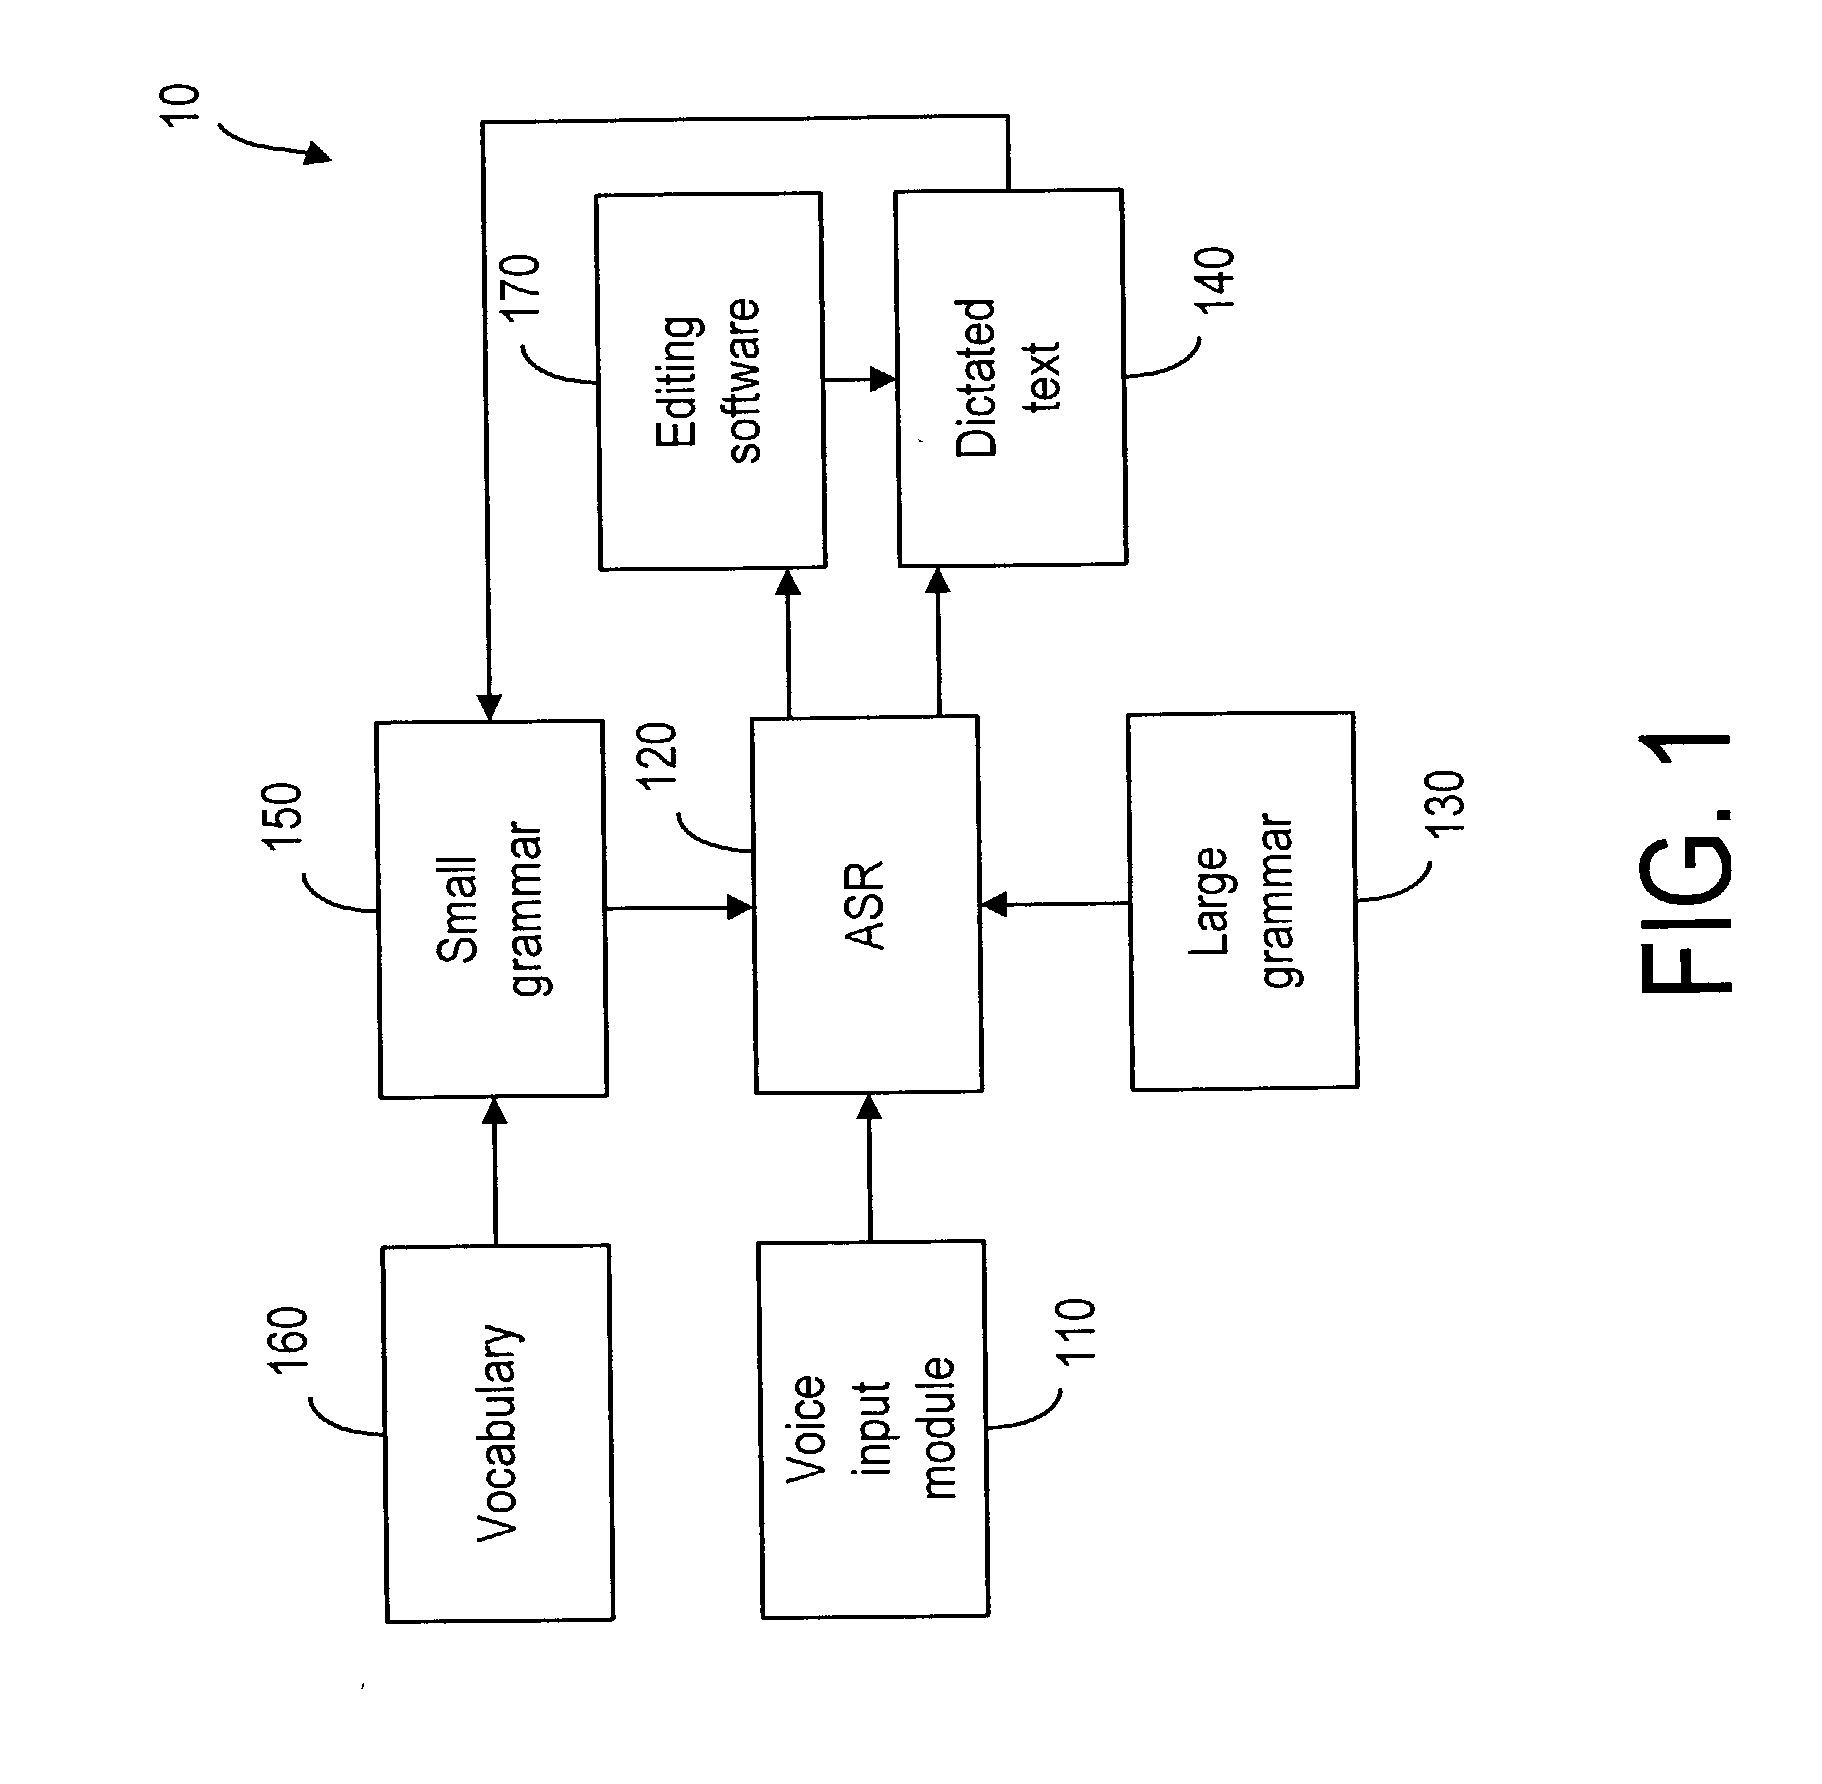 Method and system for text editing in hand-held electronic device